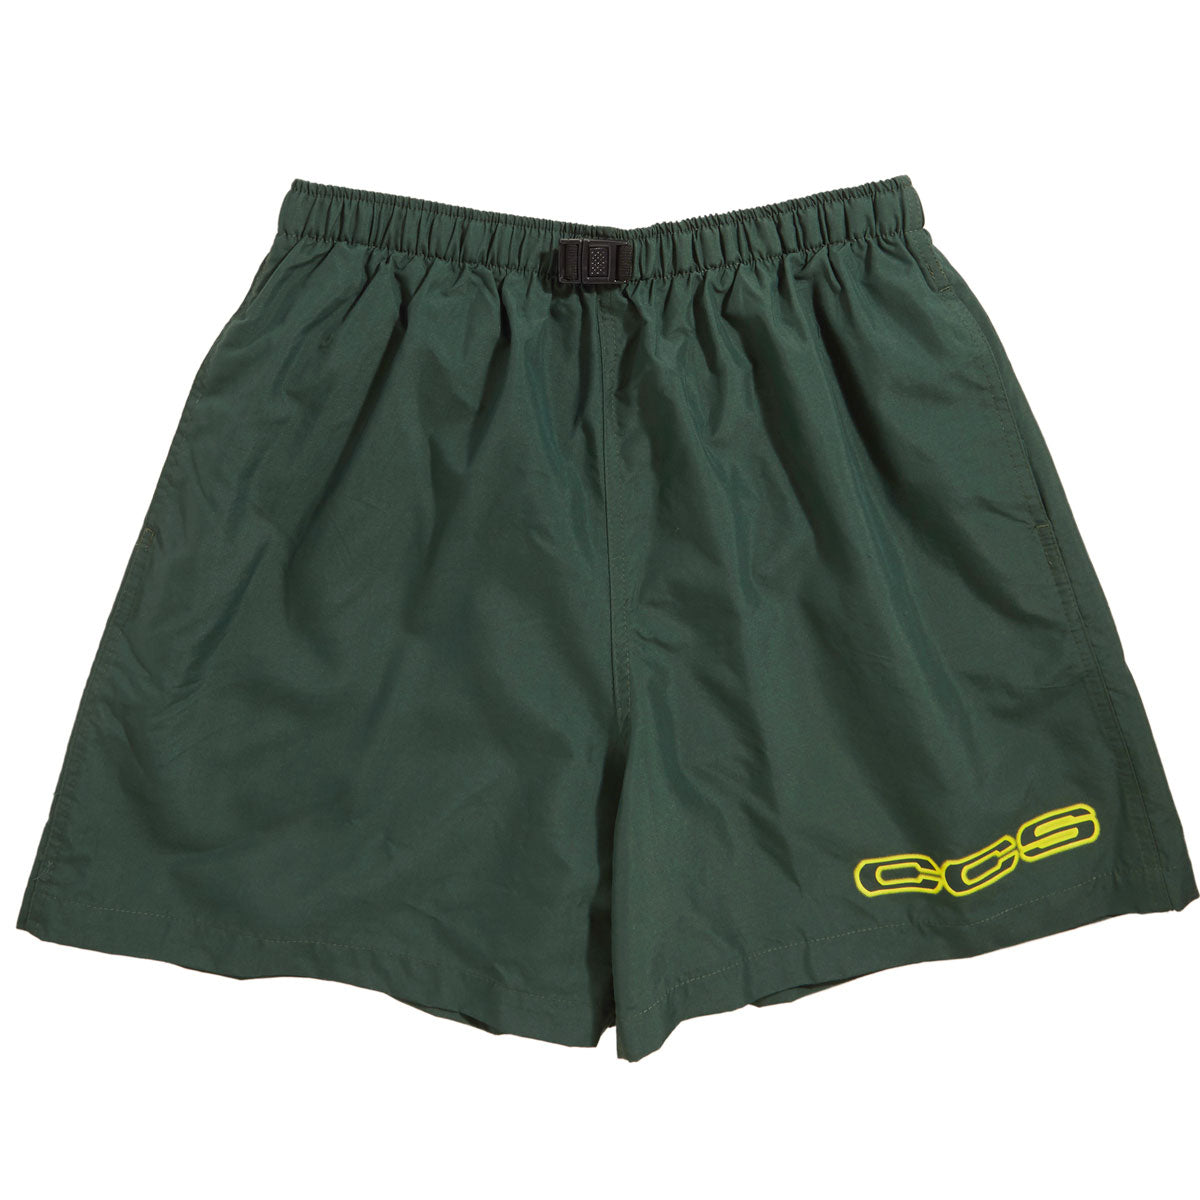 CCS 96 Neo Logo Shorts - Forest/Yellow image 1